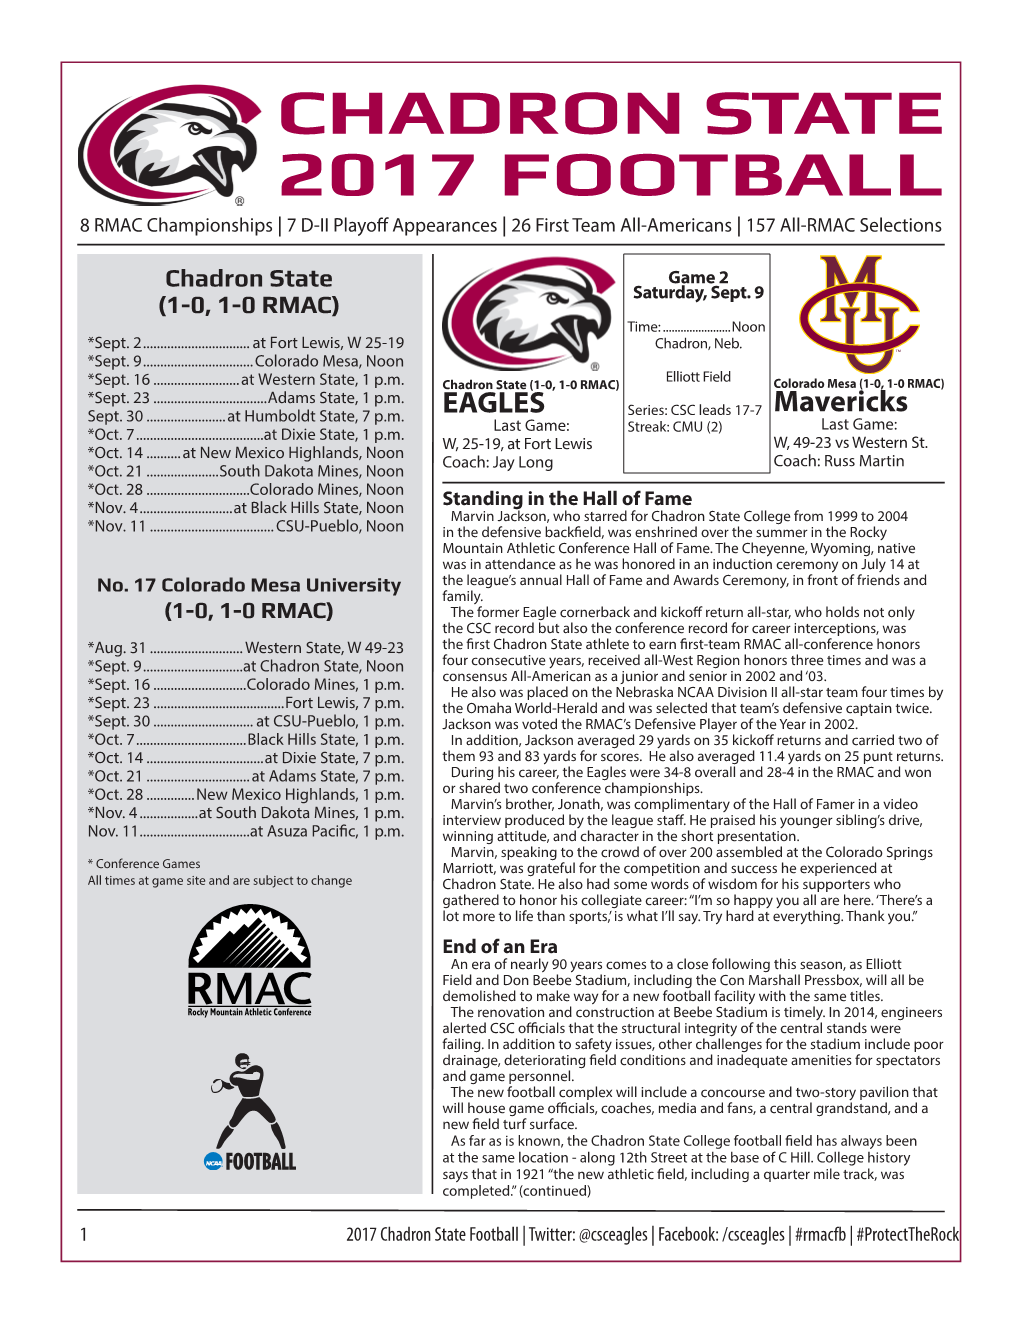 CHADRON STATE 2017 FOOTBALL 8 RMAC Championships | 7 D-II Playoff Appearances | 26 First Team All-Americans | 157 All-RMAC Selections